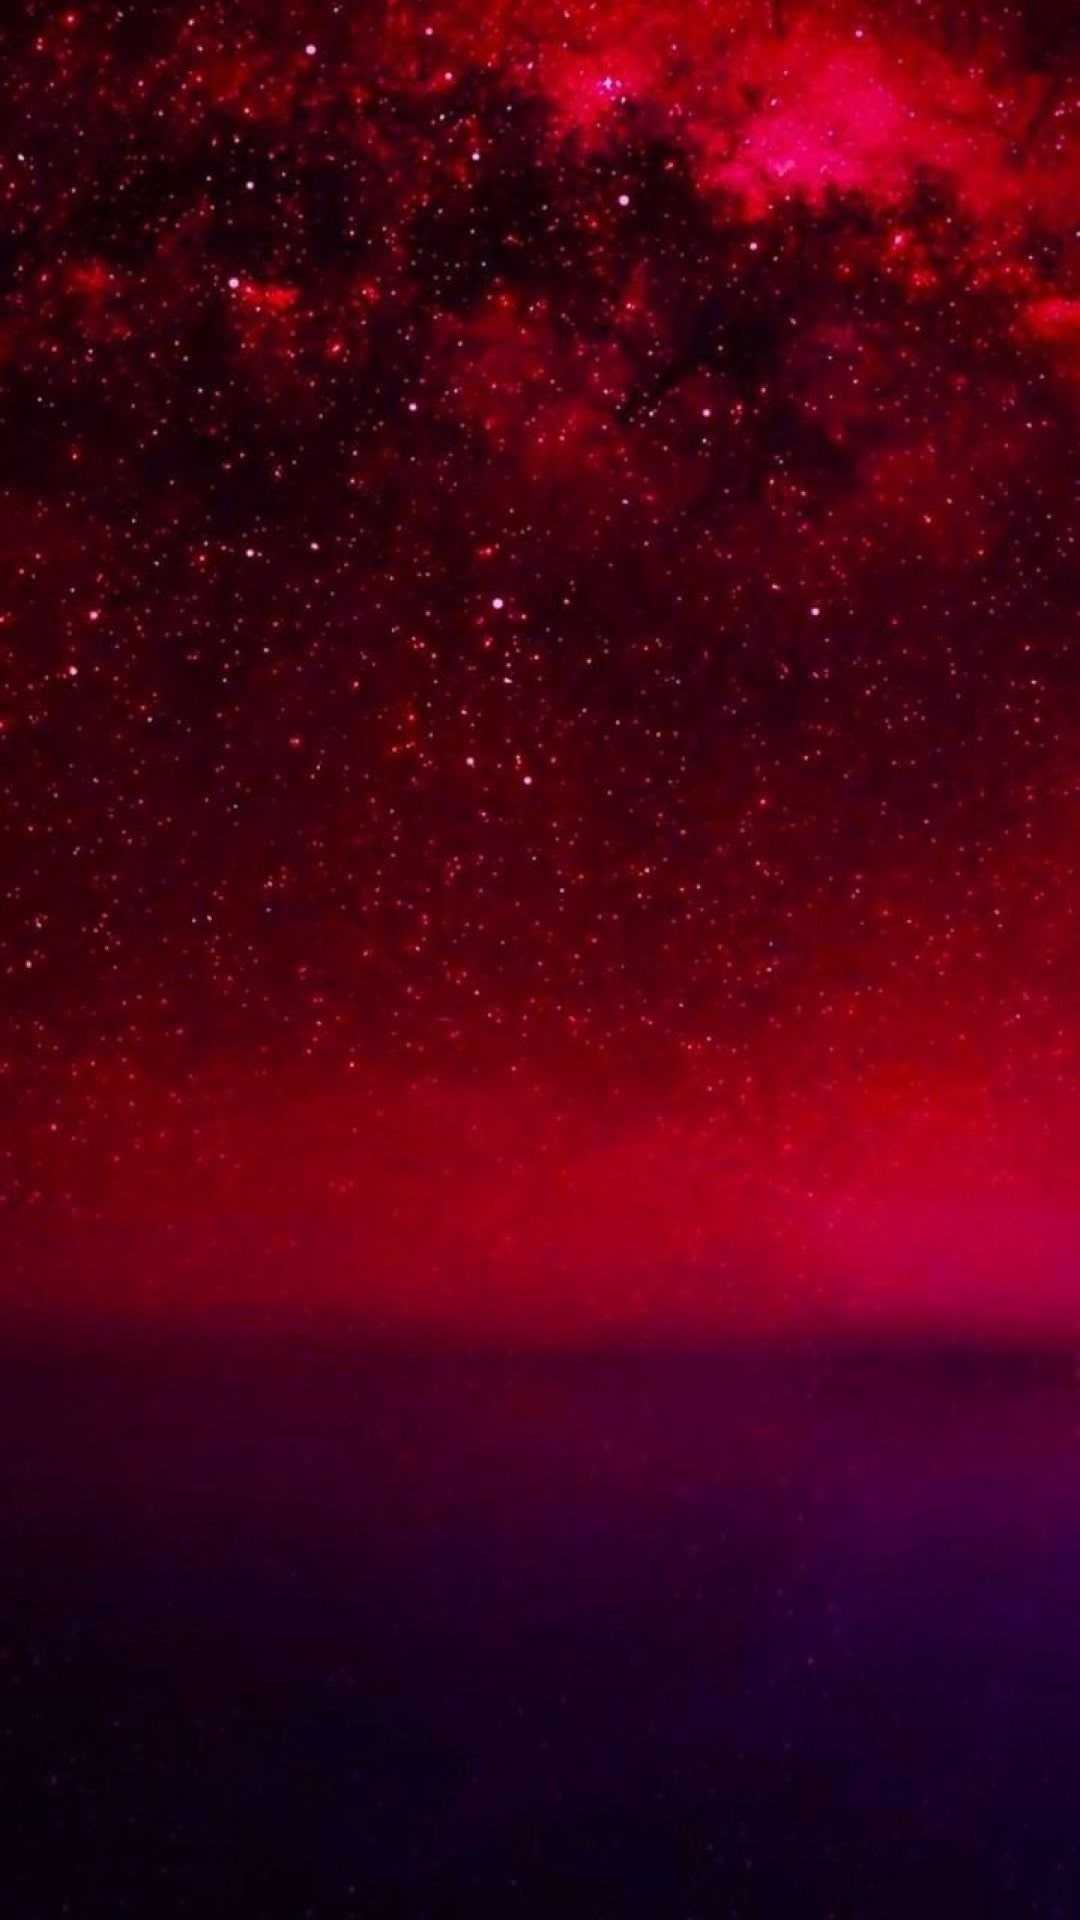 The night sky with stars and a red glow - Dark red, iPhone red